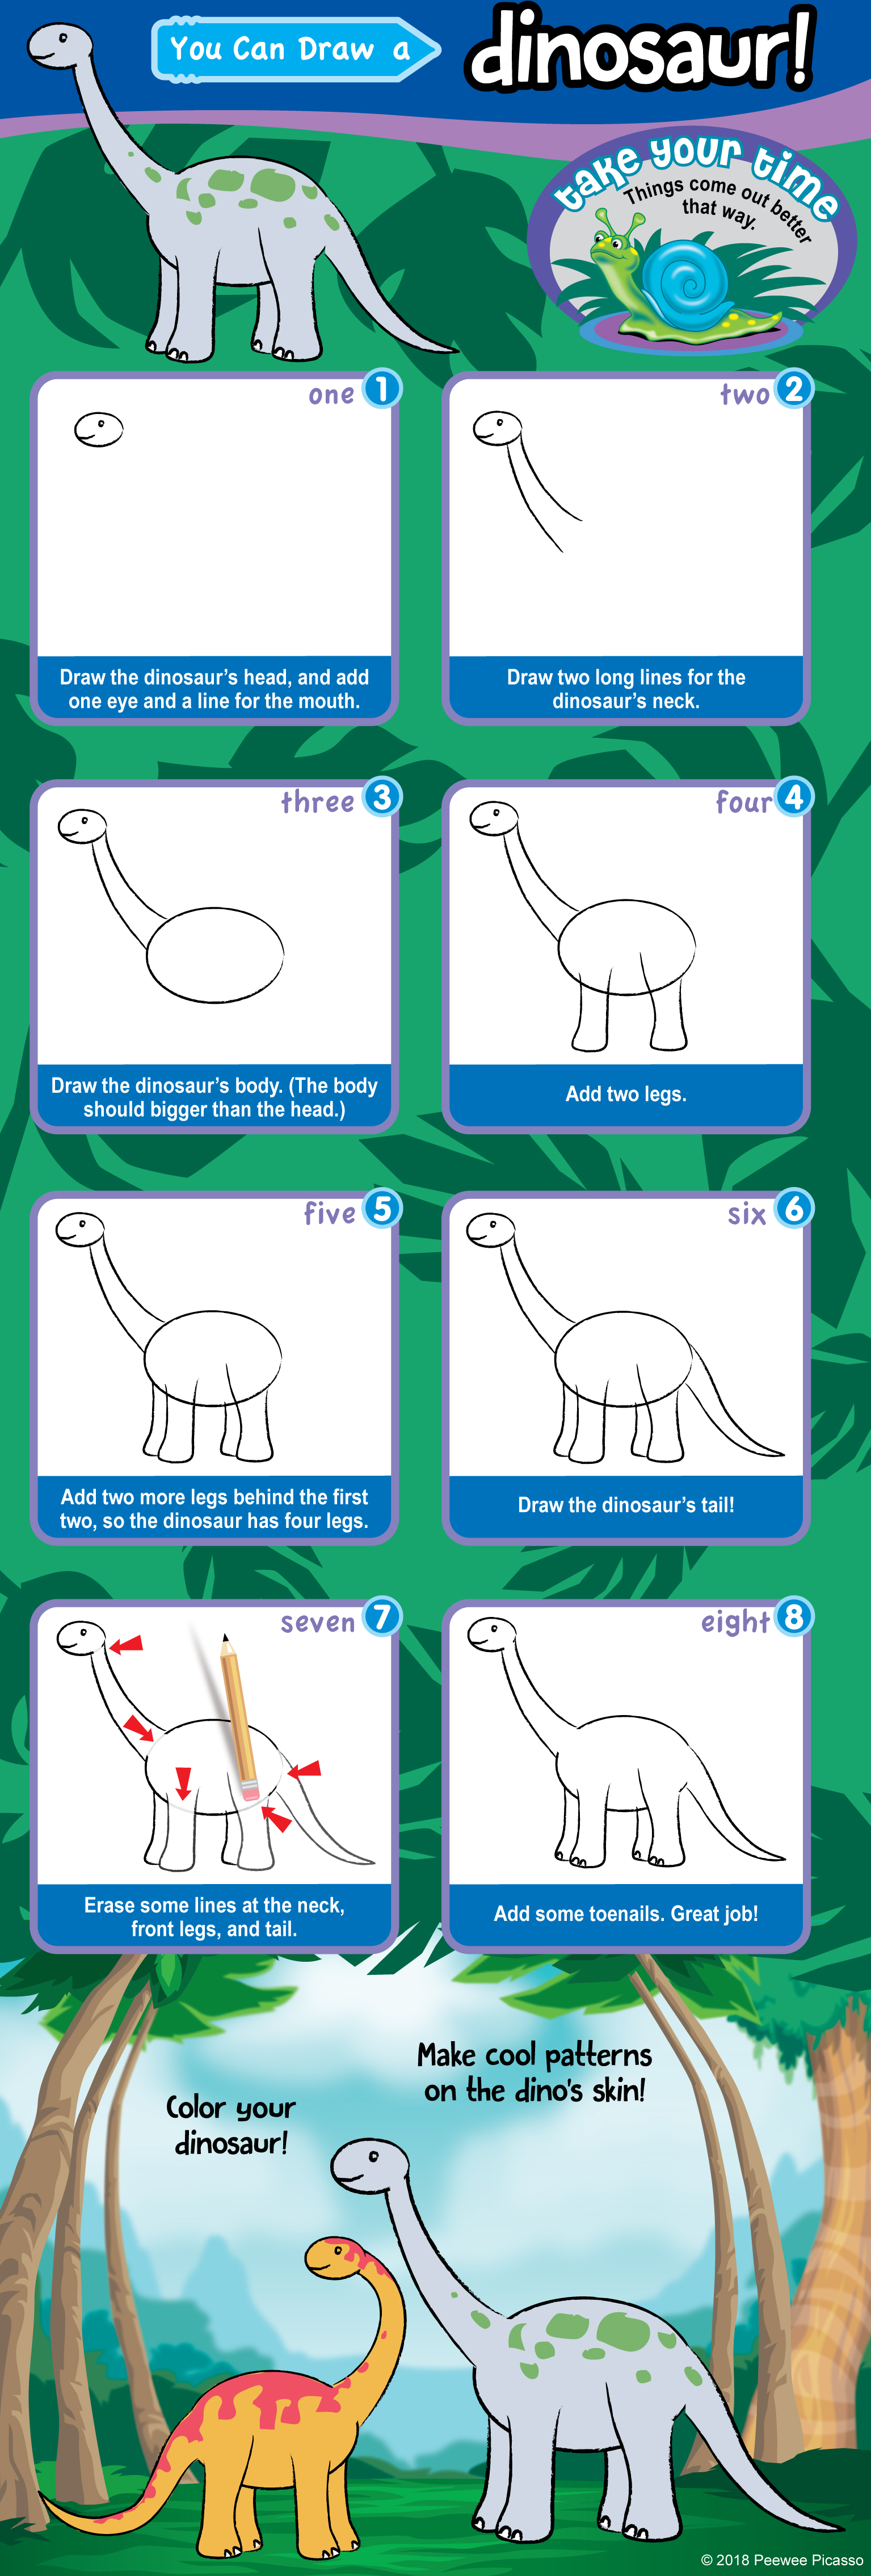 easy steps to draw a dinosaur for children